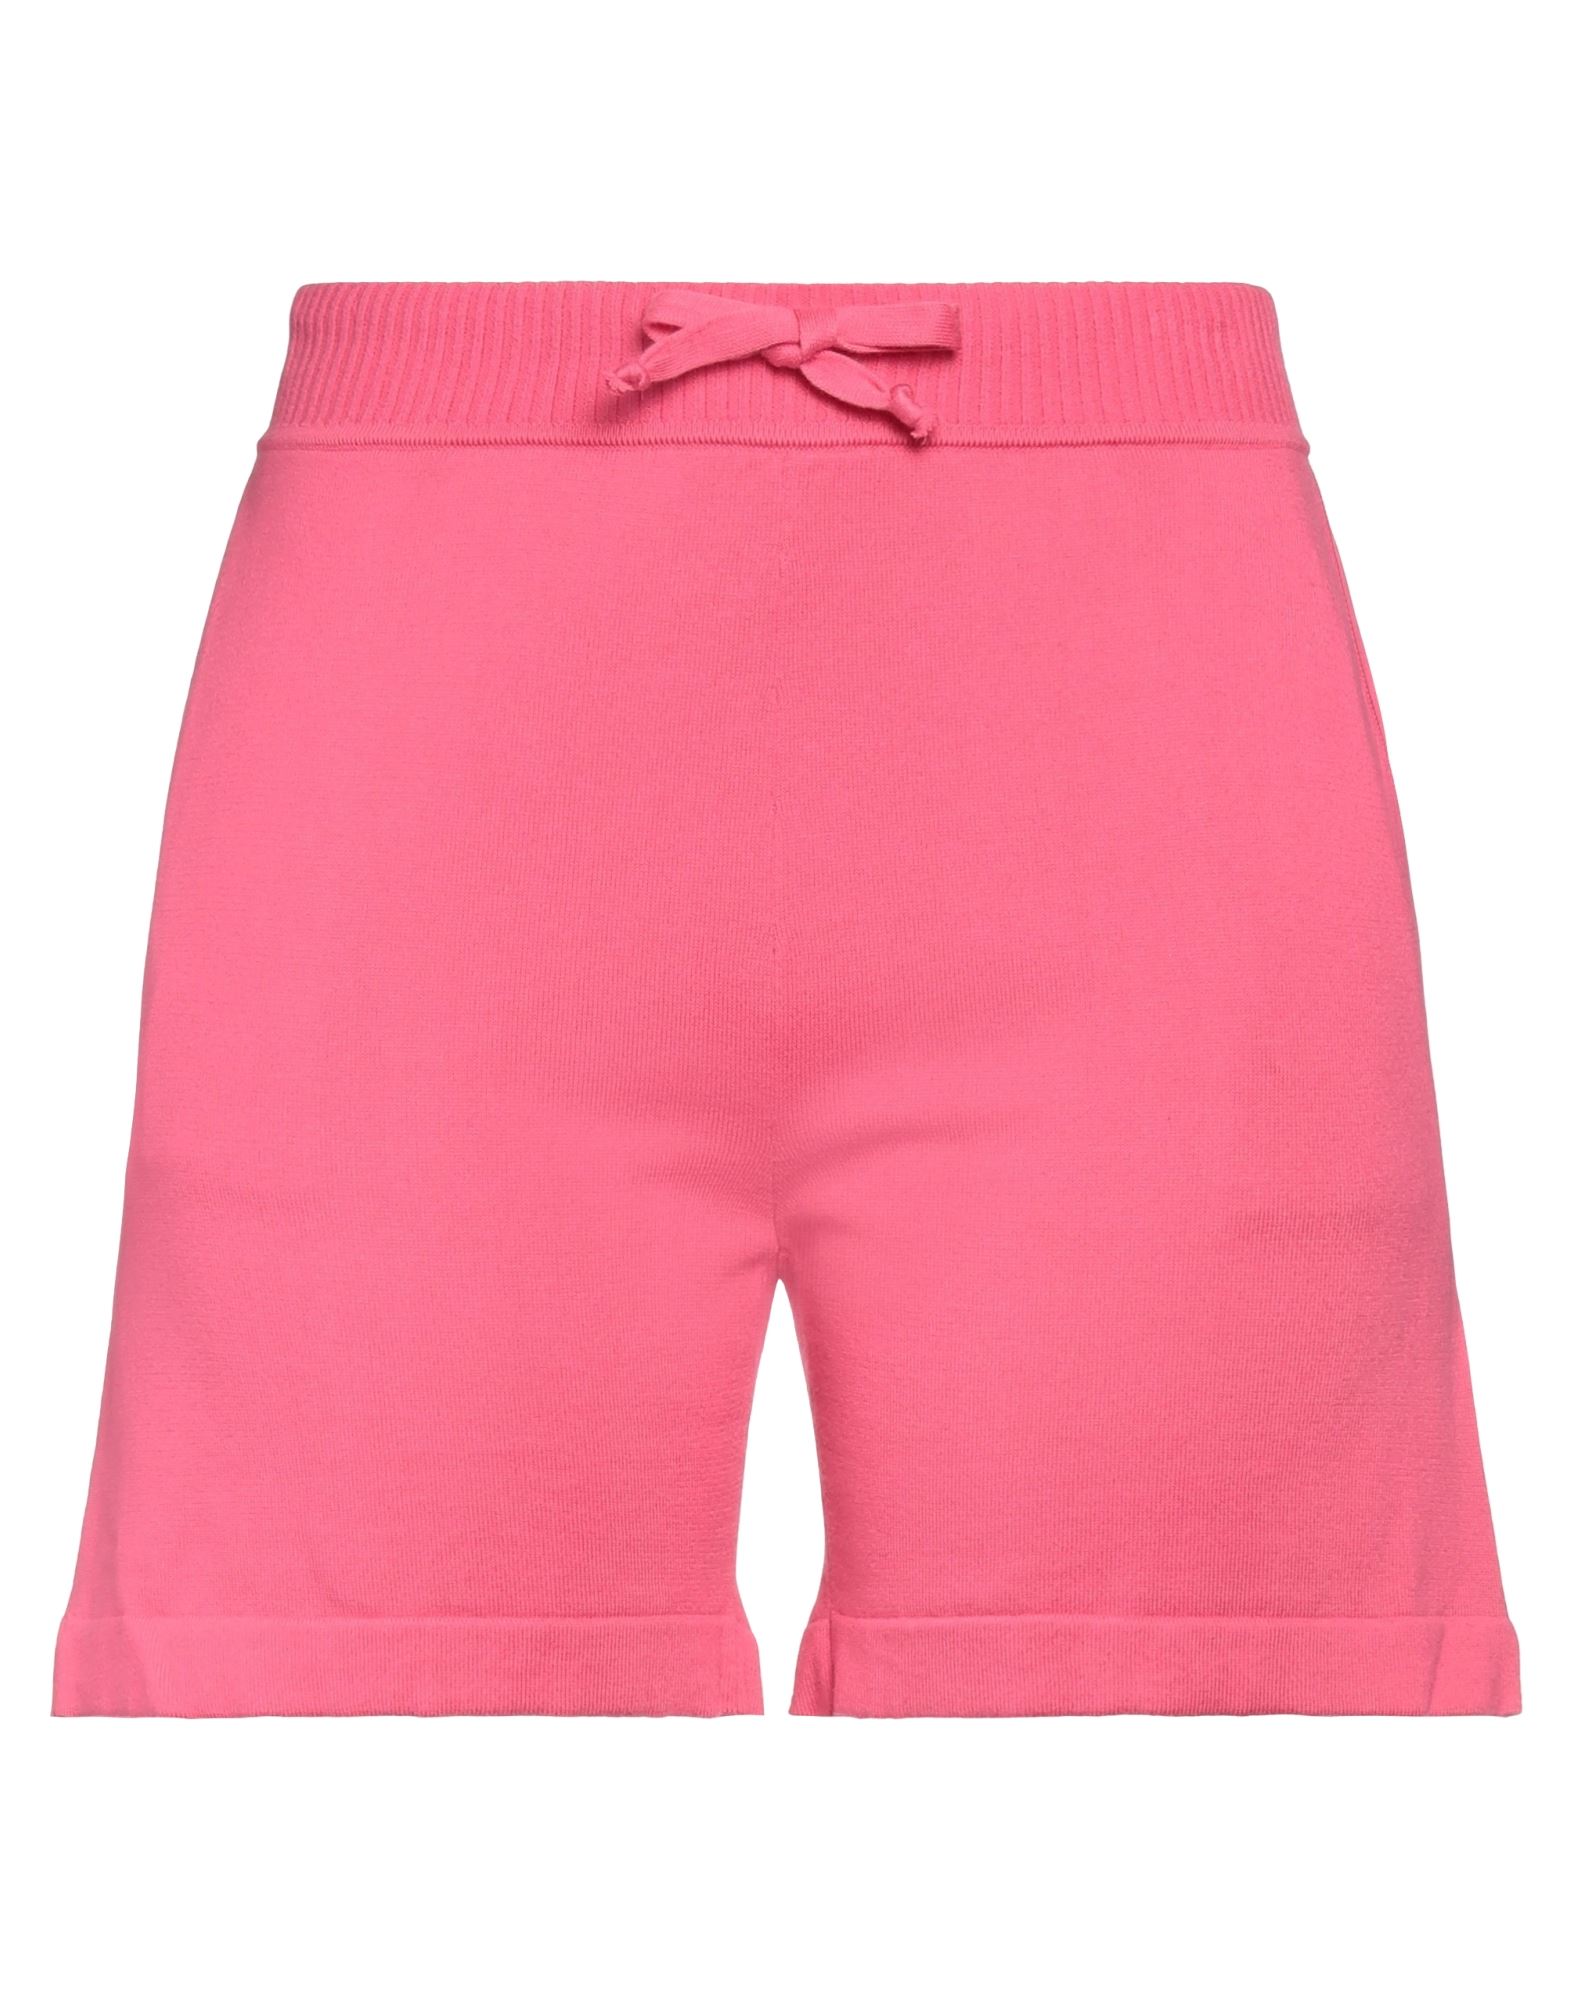 P.a.r.o.s.h P. A.r. O.s. H. Woman Shorts & Bermuda Shorts Fuchsia Size M Cotton In Pink